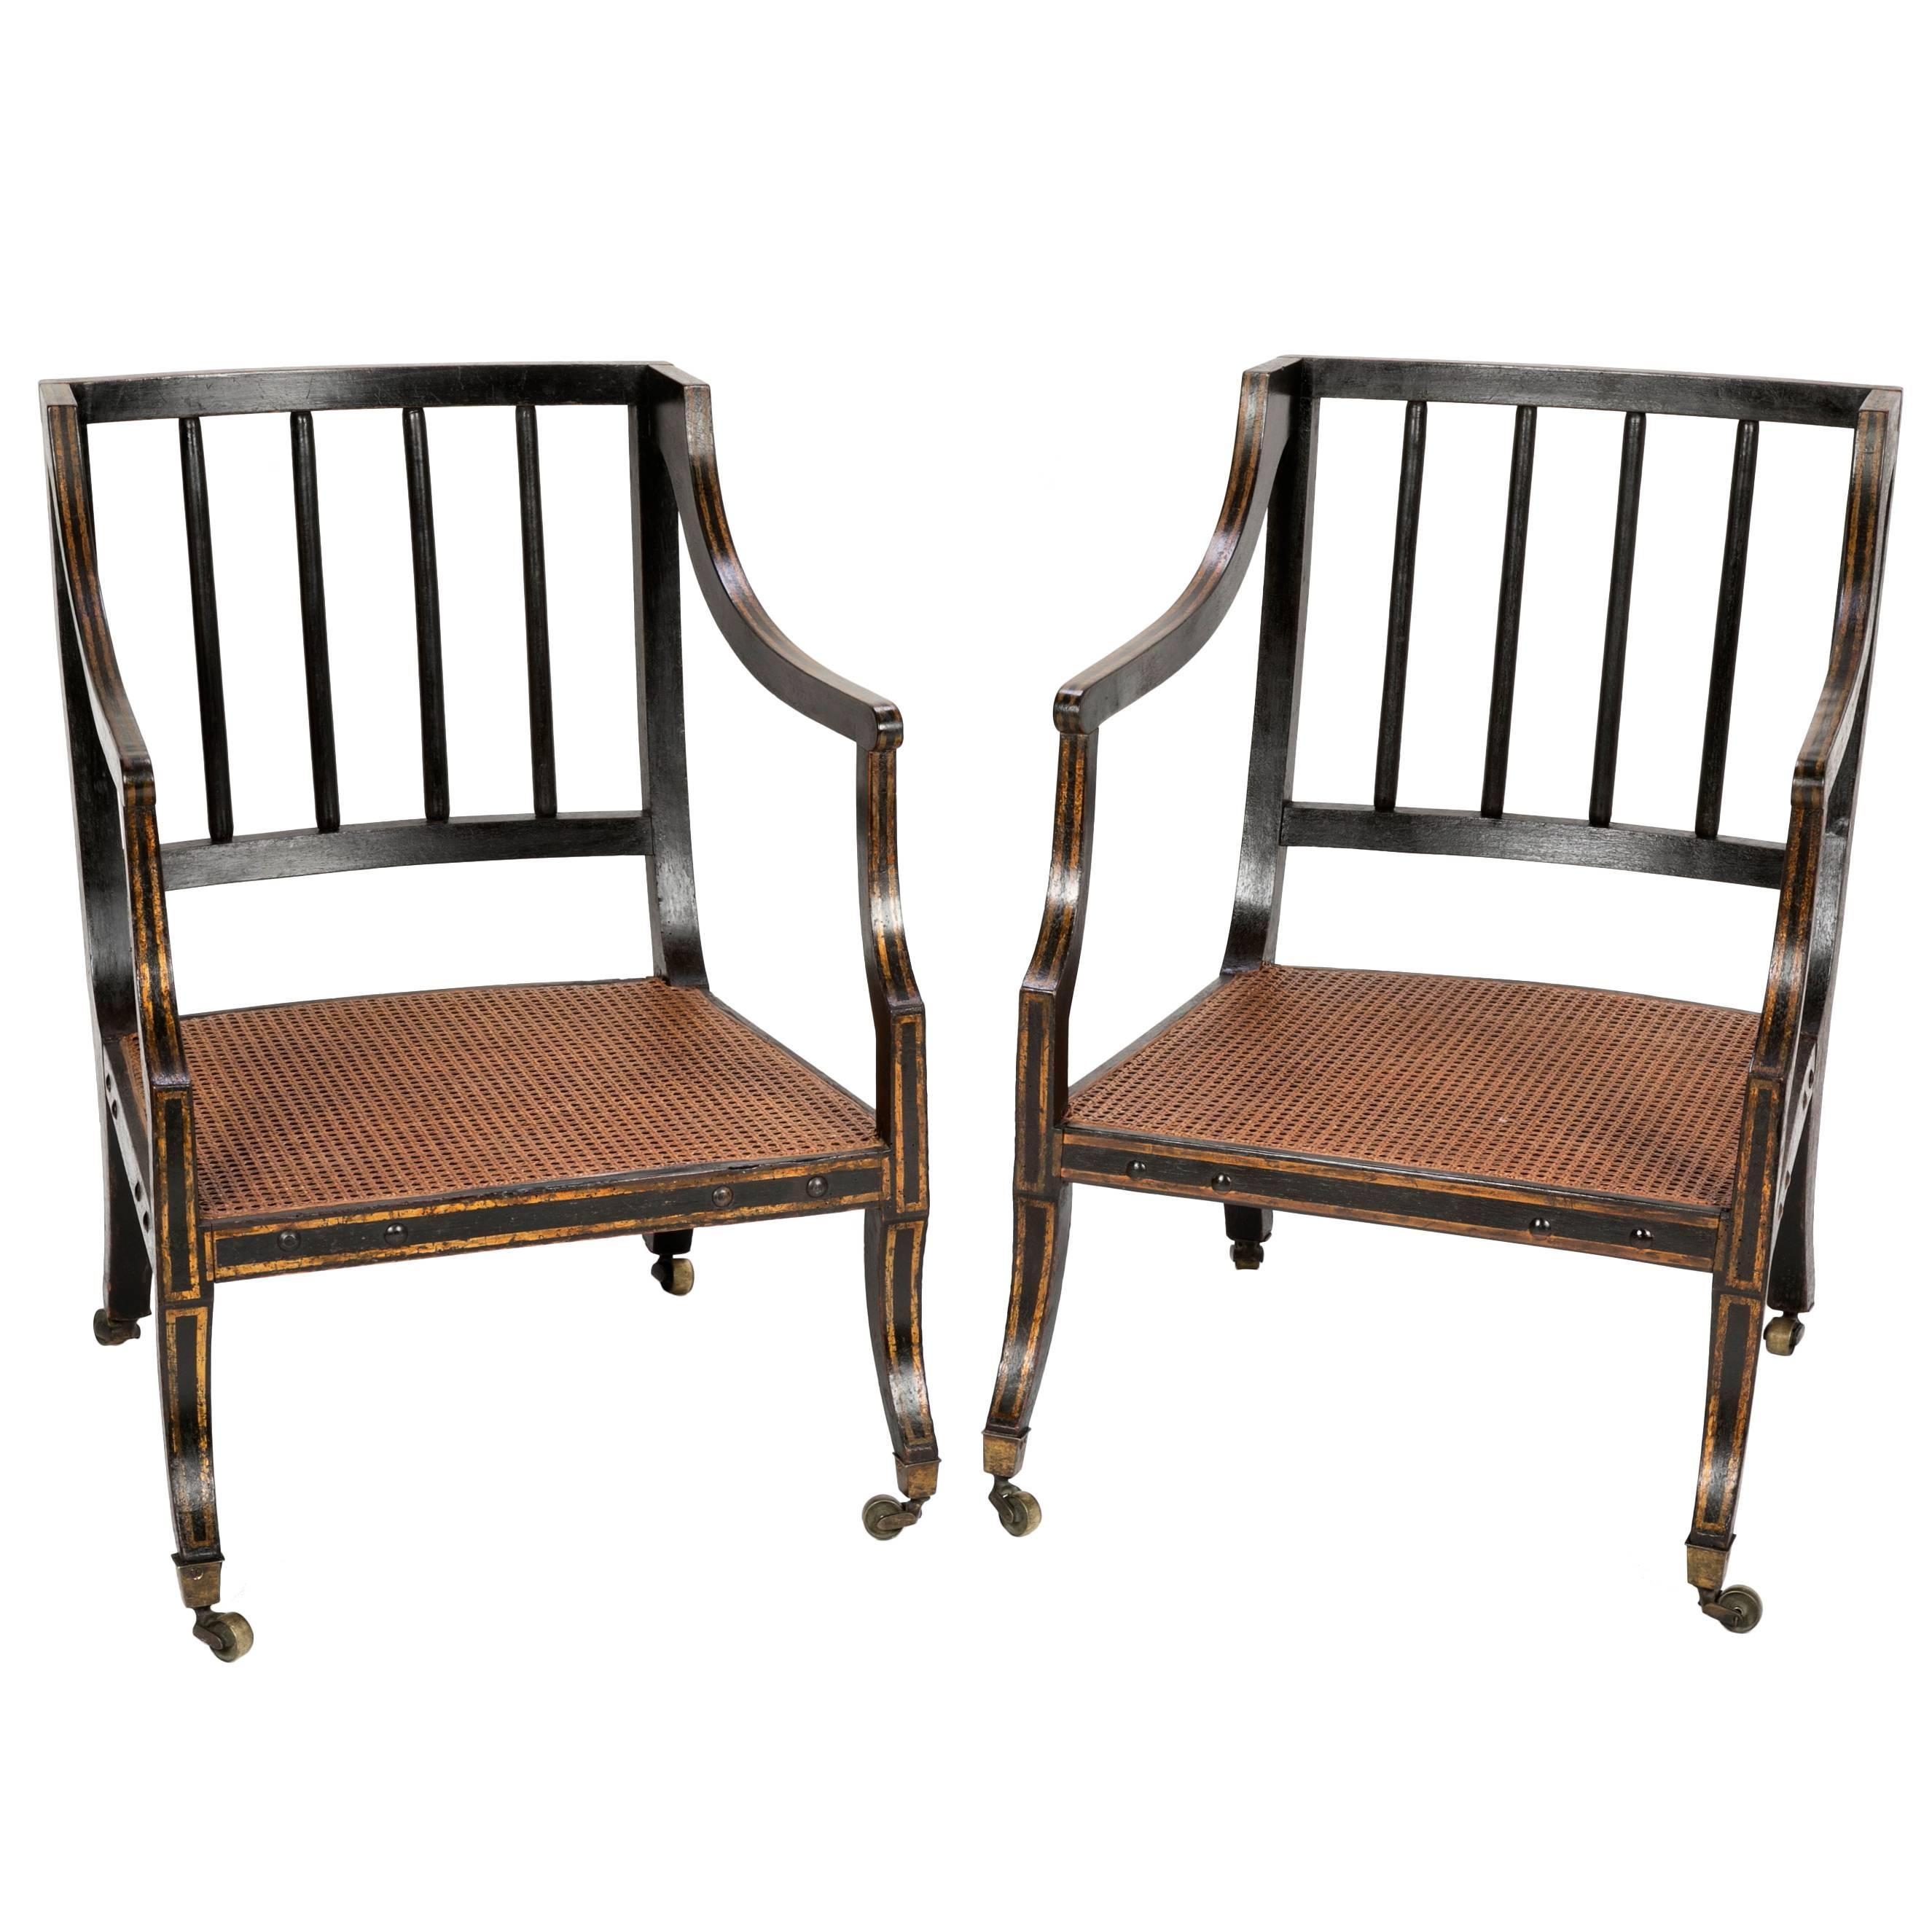 Pair of Regency Ebonized and Gilded Caned Armchairs